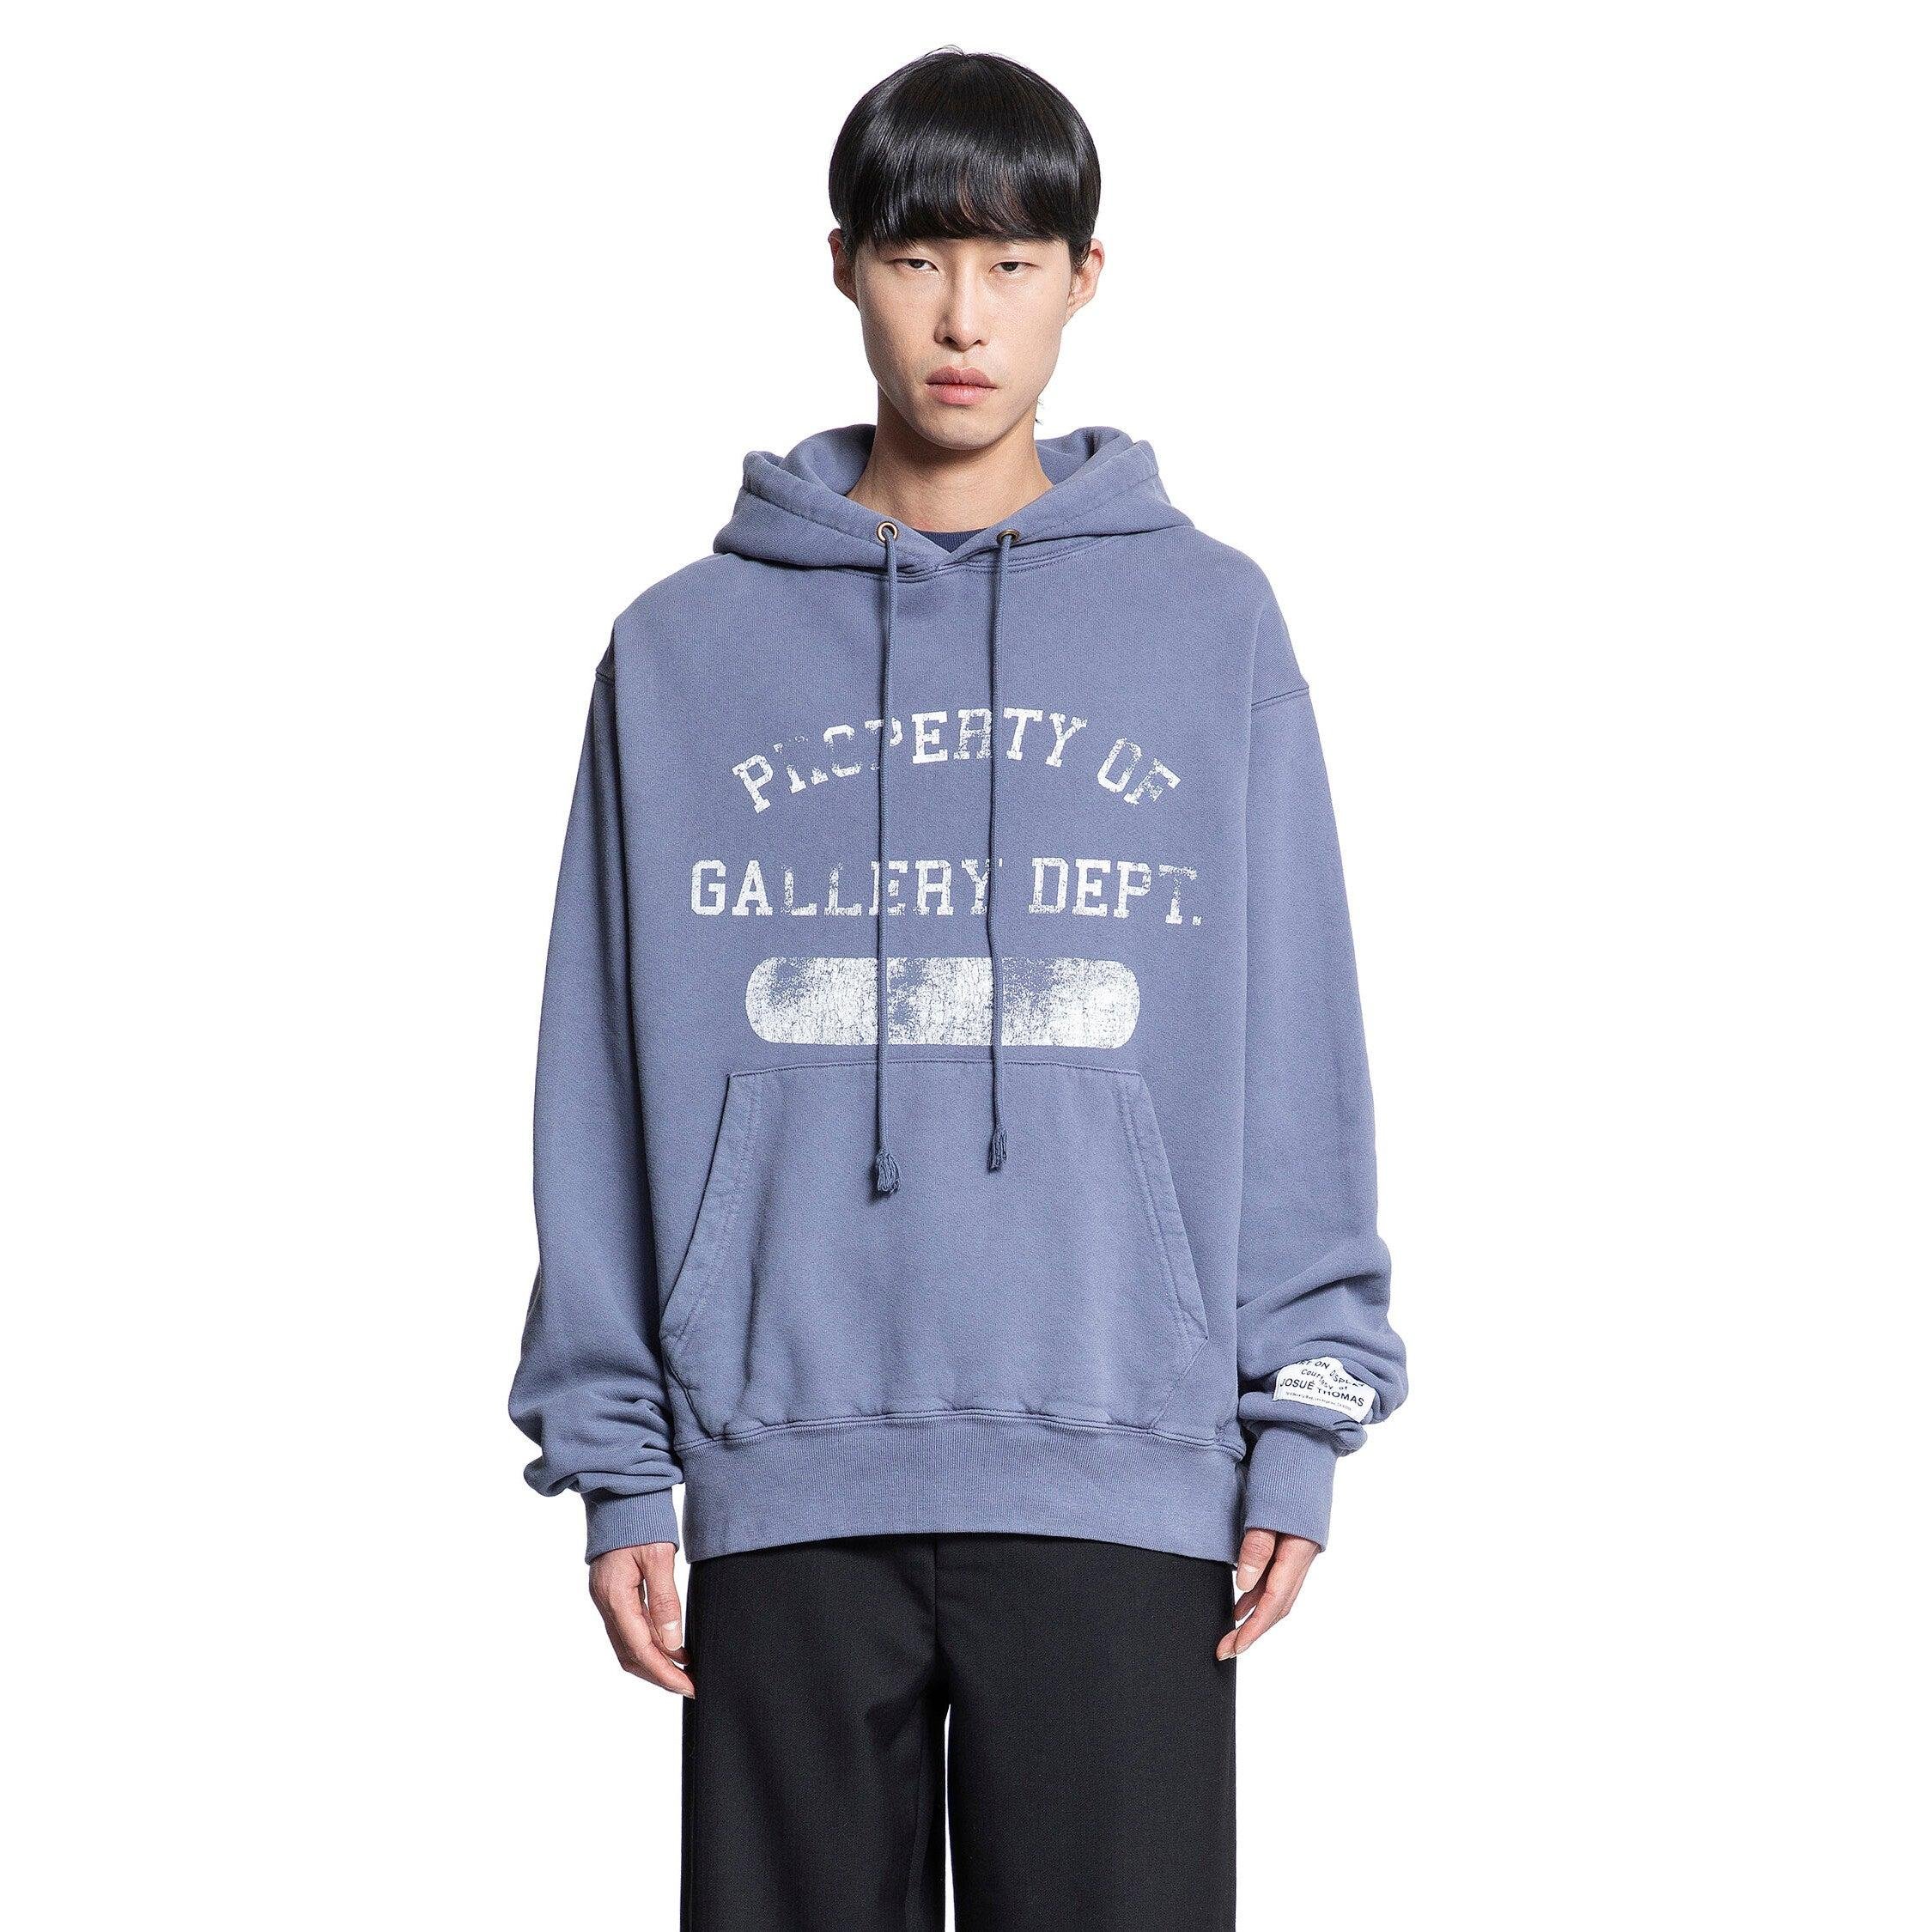 GALLERY DEPT. MAN BLUE SWEAT-SHIRTS by GALLERY DEPT.